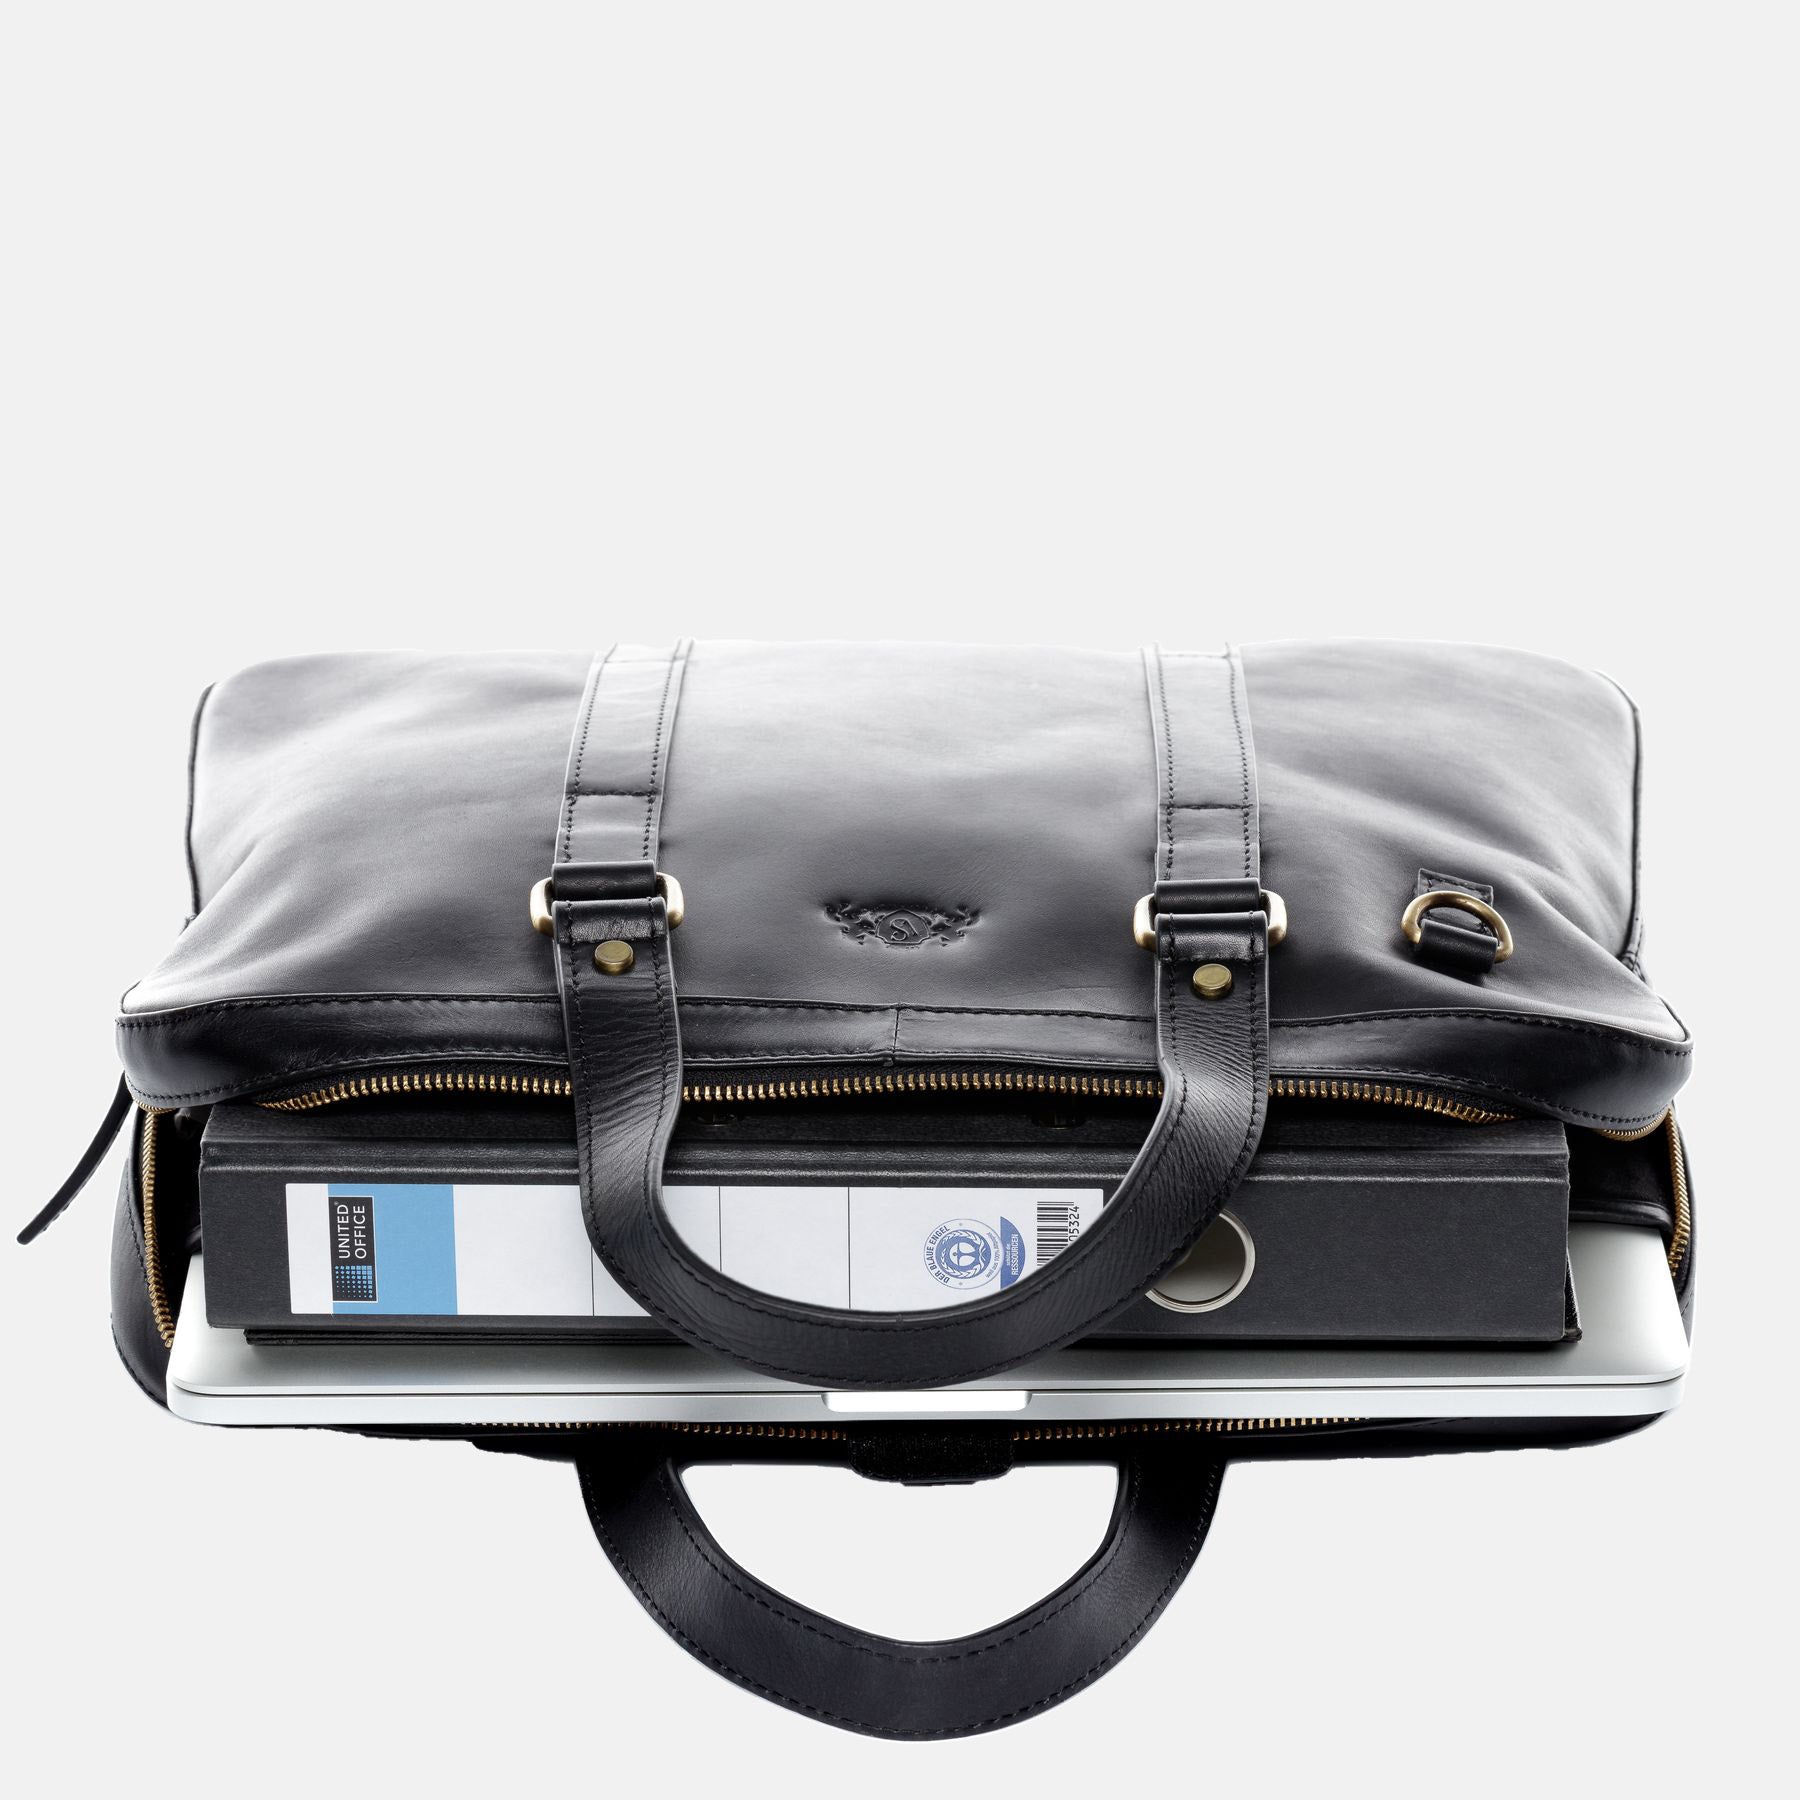 Laptop bag Maguire smooth leather black